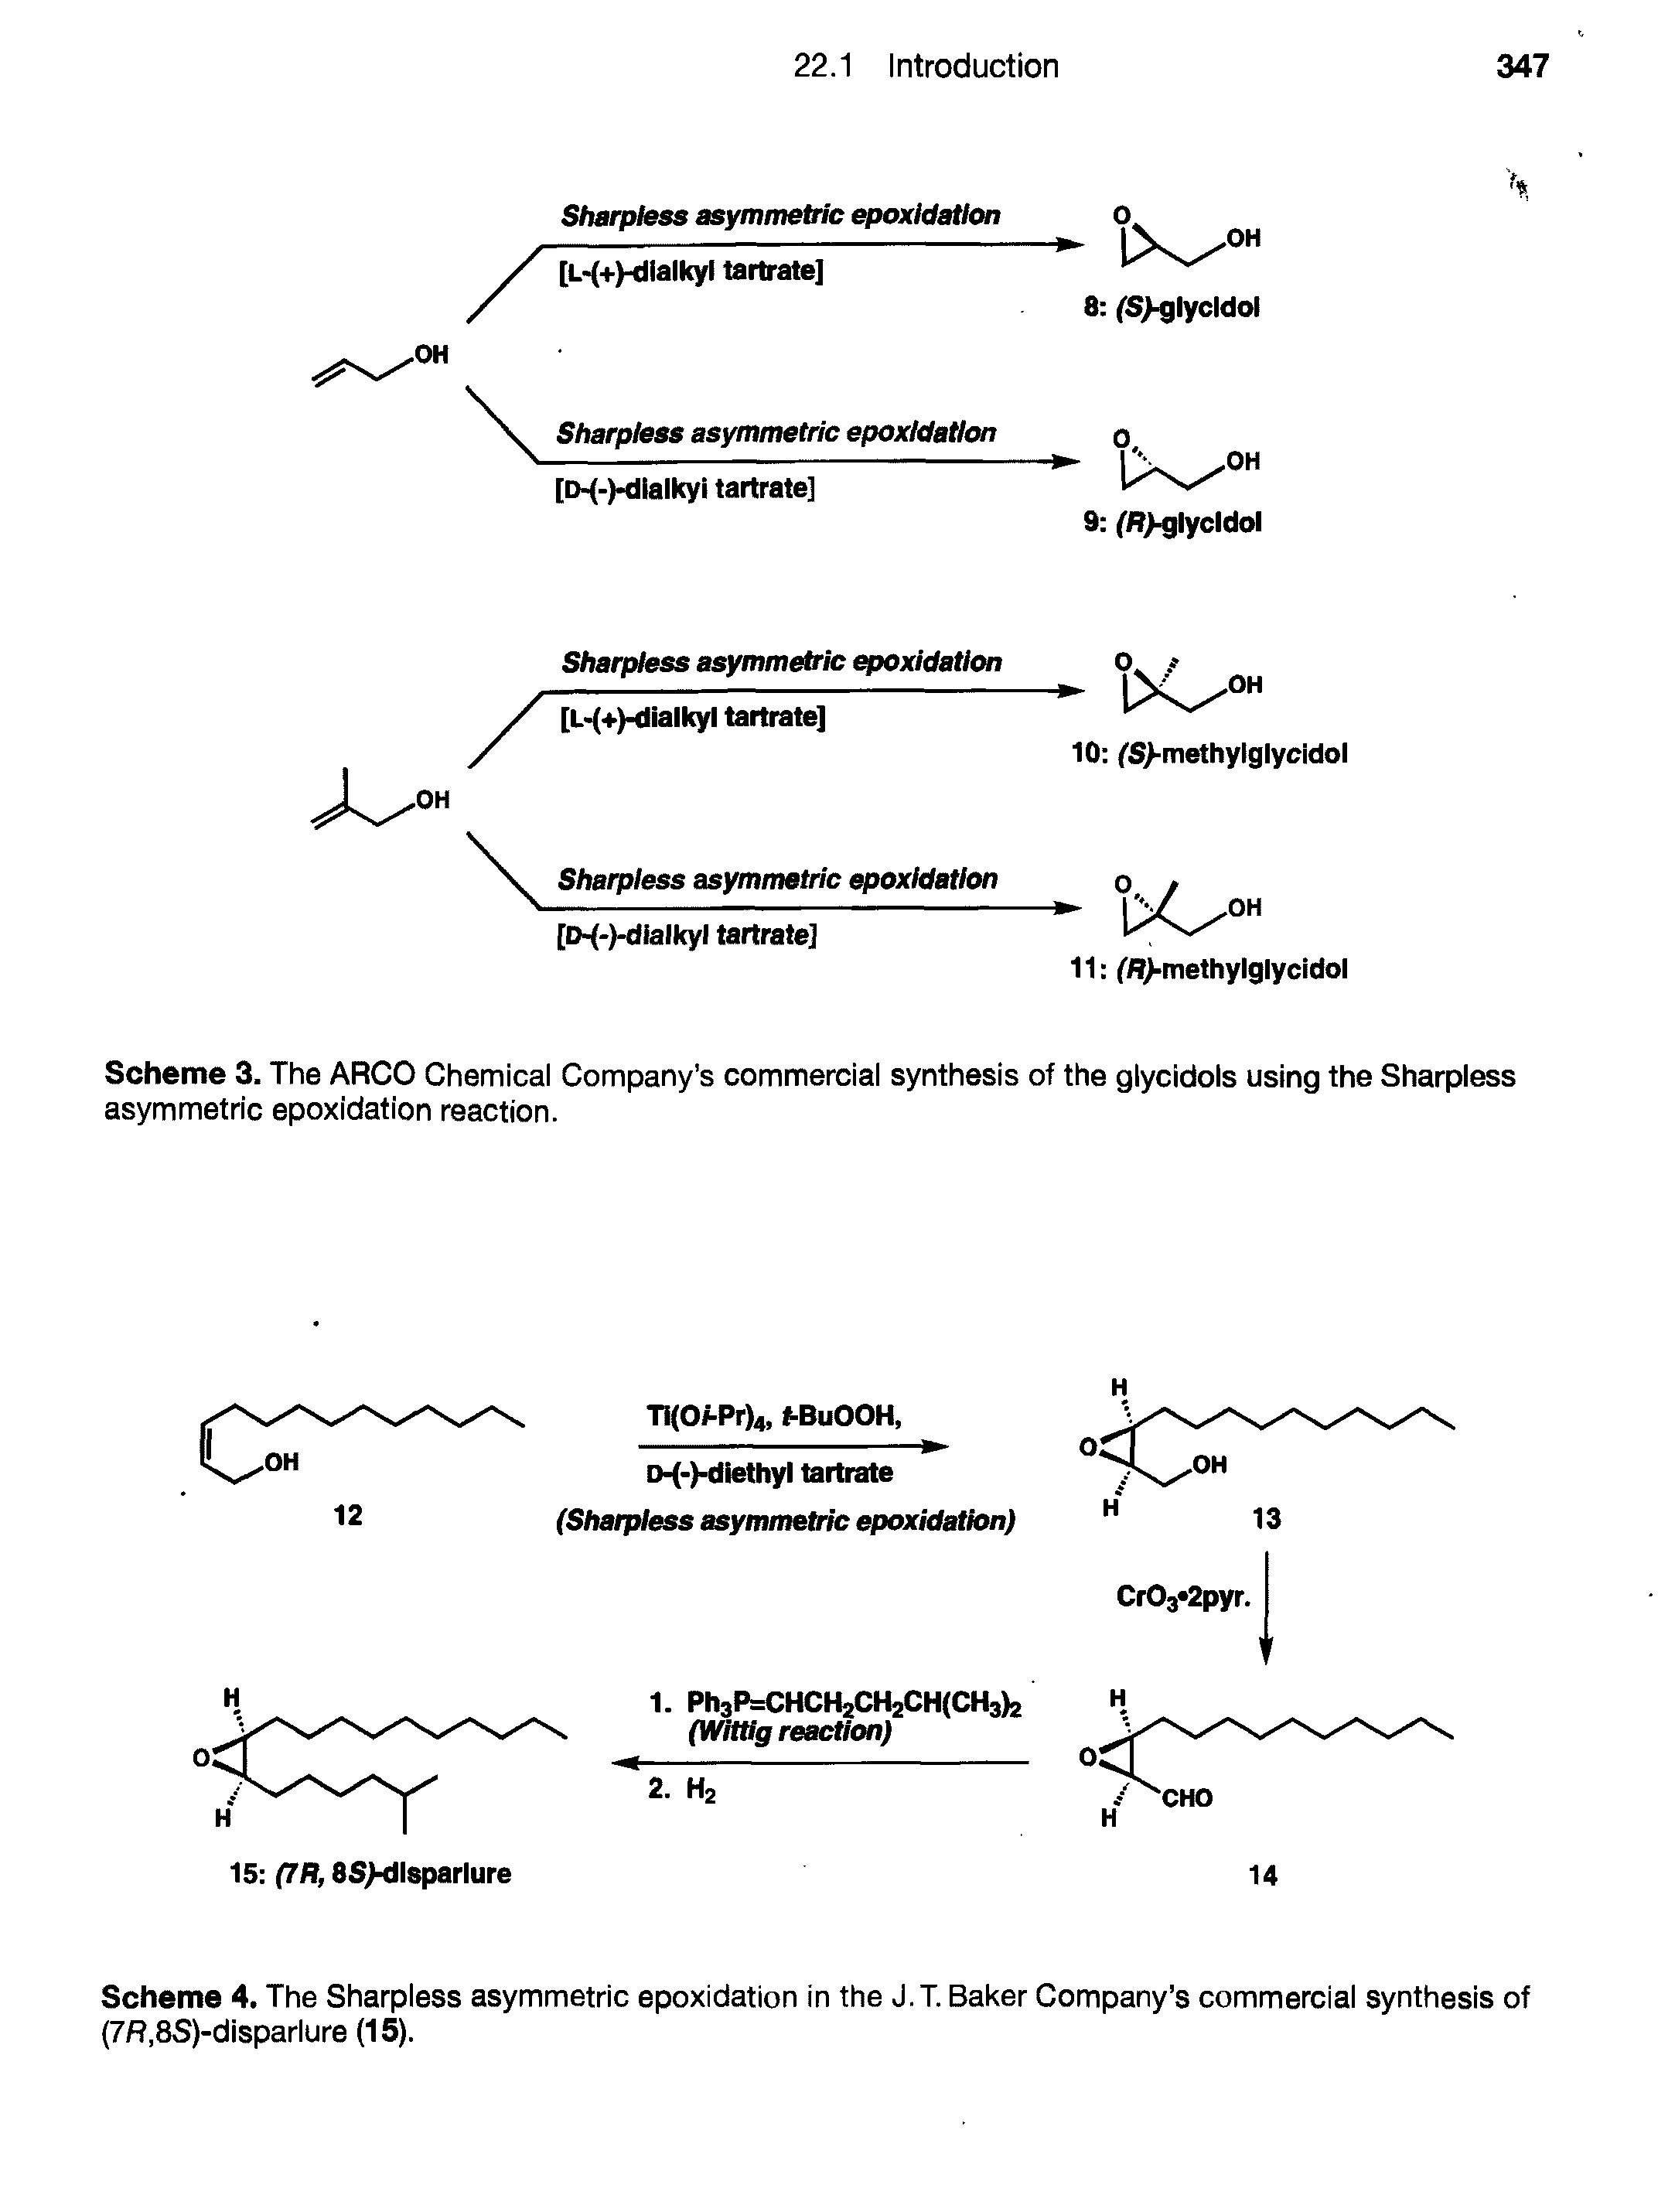 Scheme 4. The Sharpless asymmetric epoxidation in the J.T. Baker Company s commercial synthesis of (7/ ,8S)-disparlure (15).